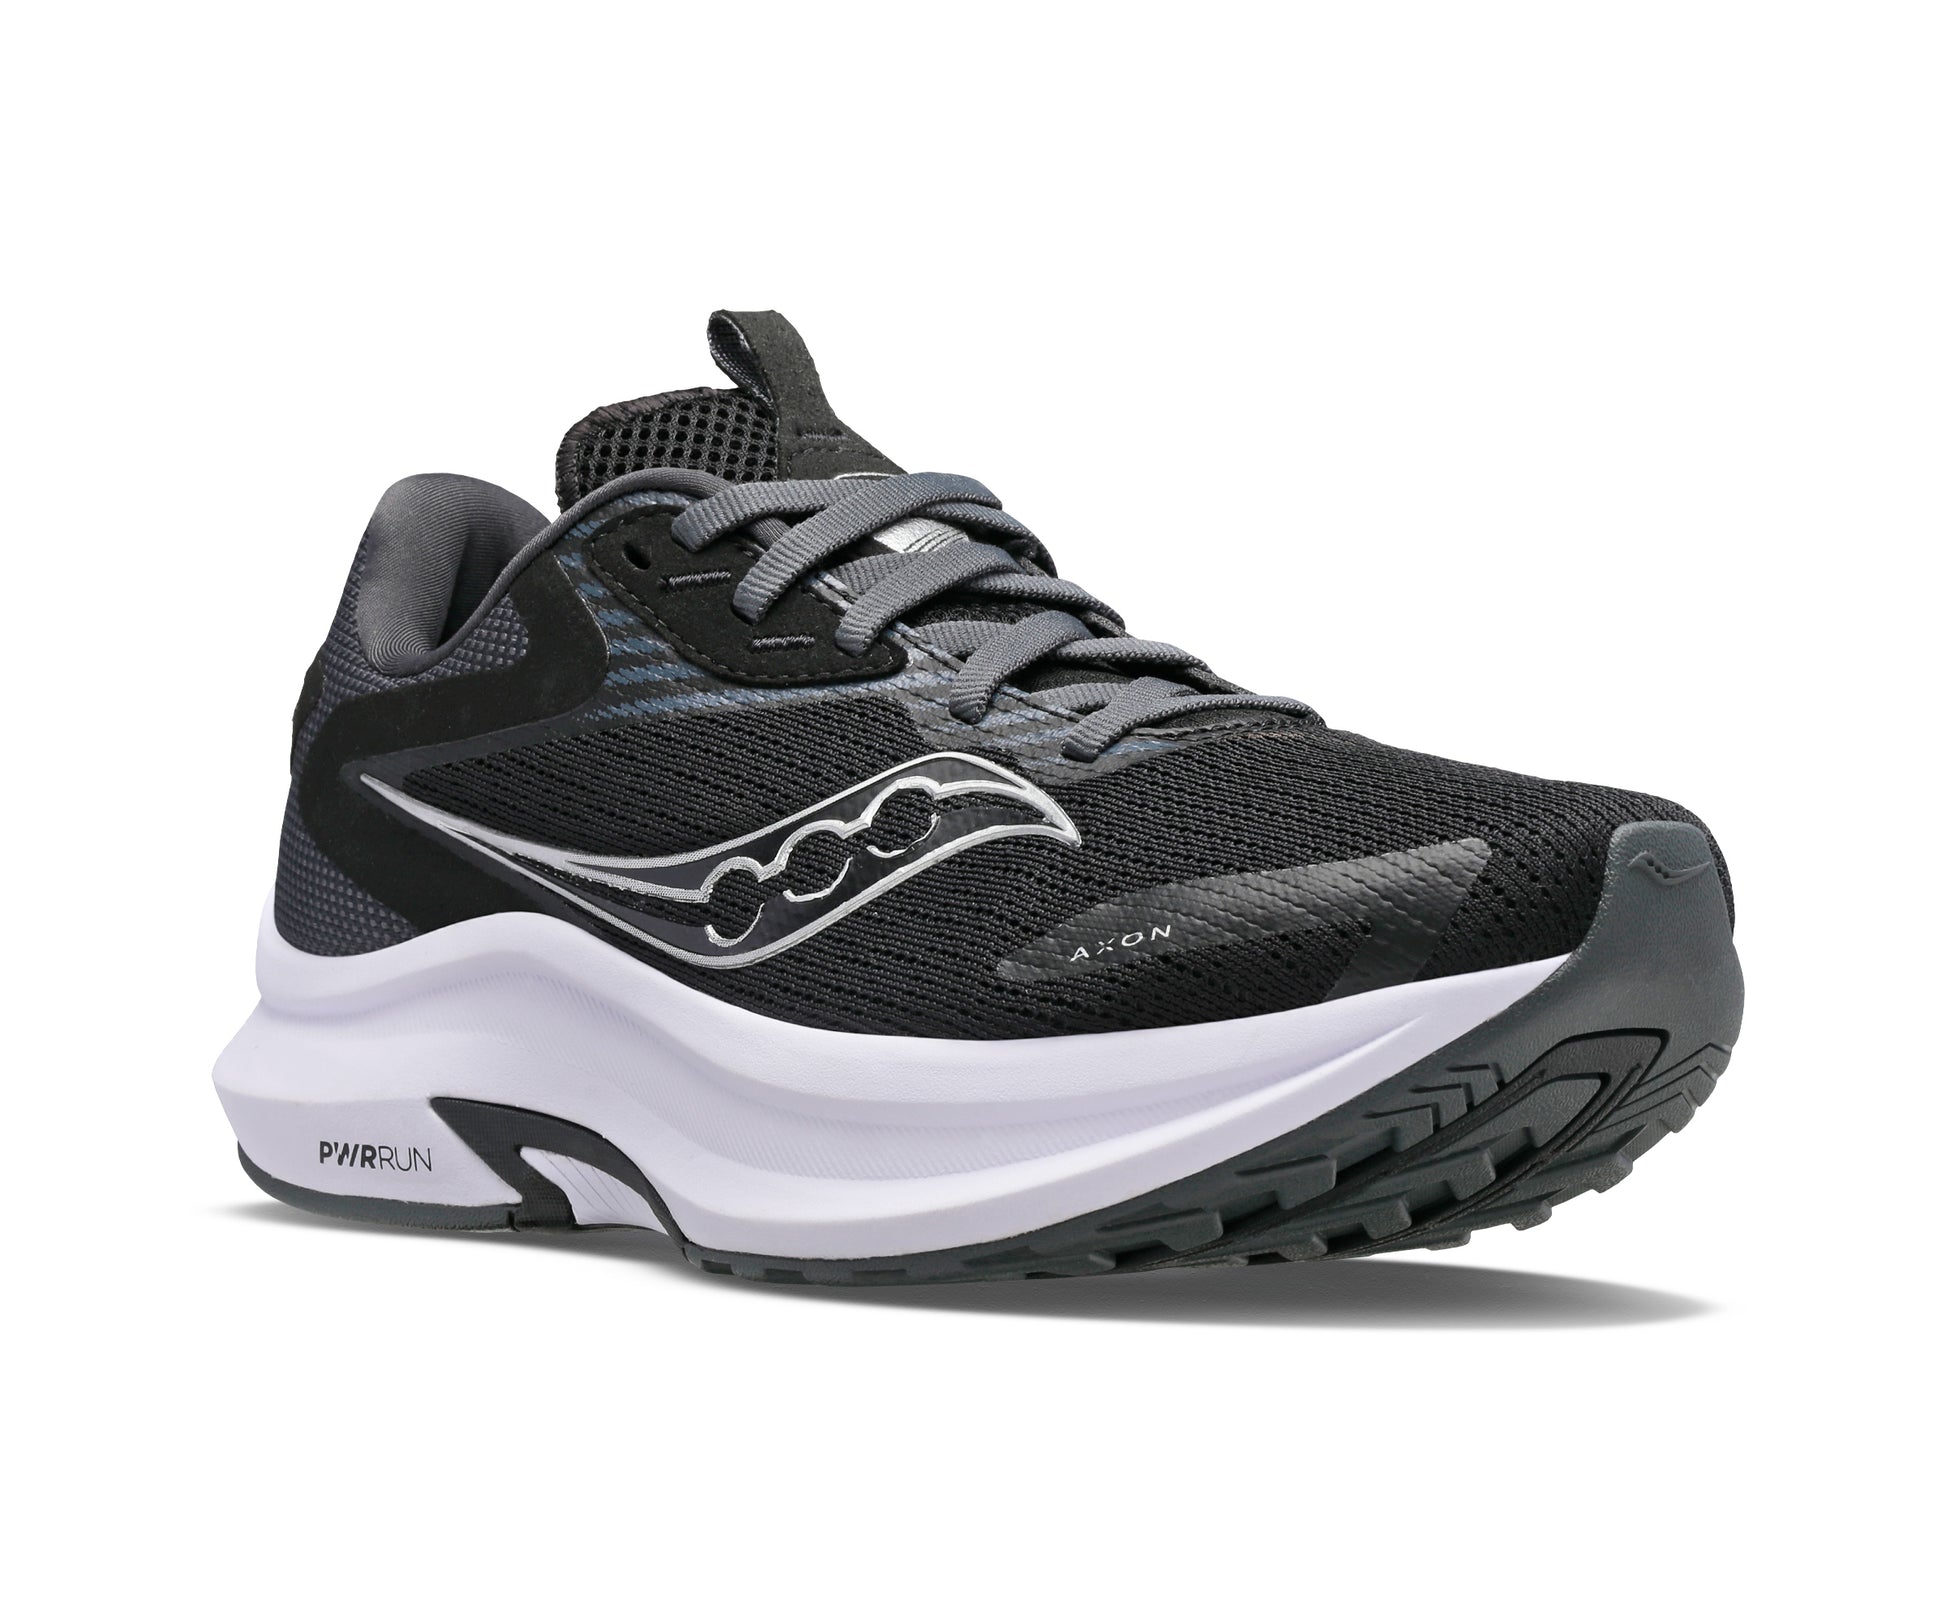 Saucony Axon 2 women's neutral running shoe black, grey, and white